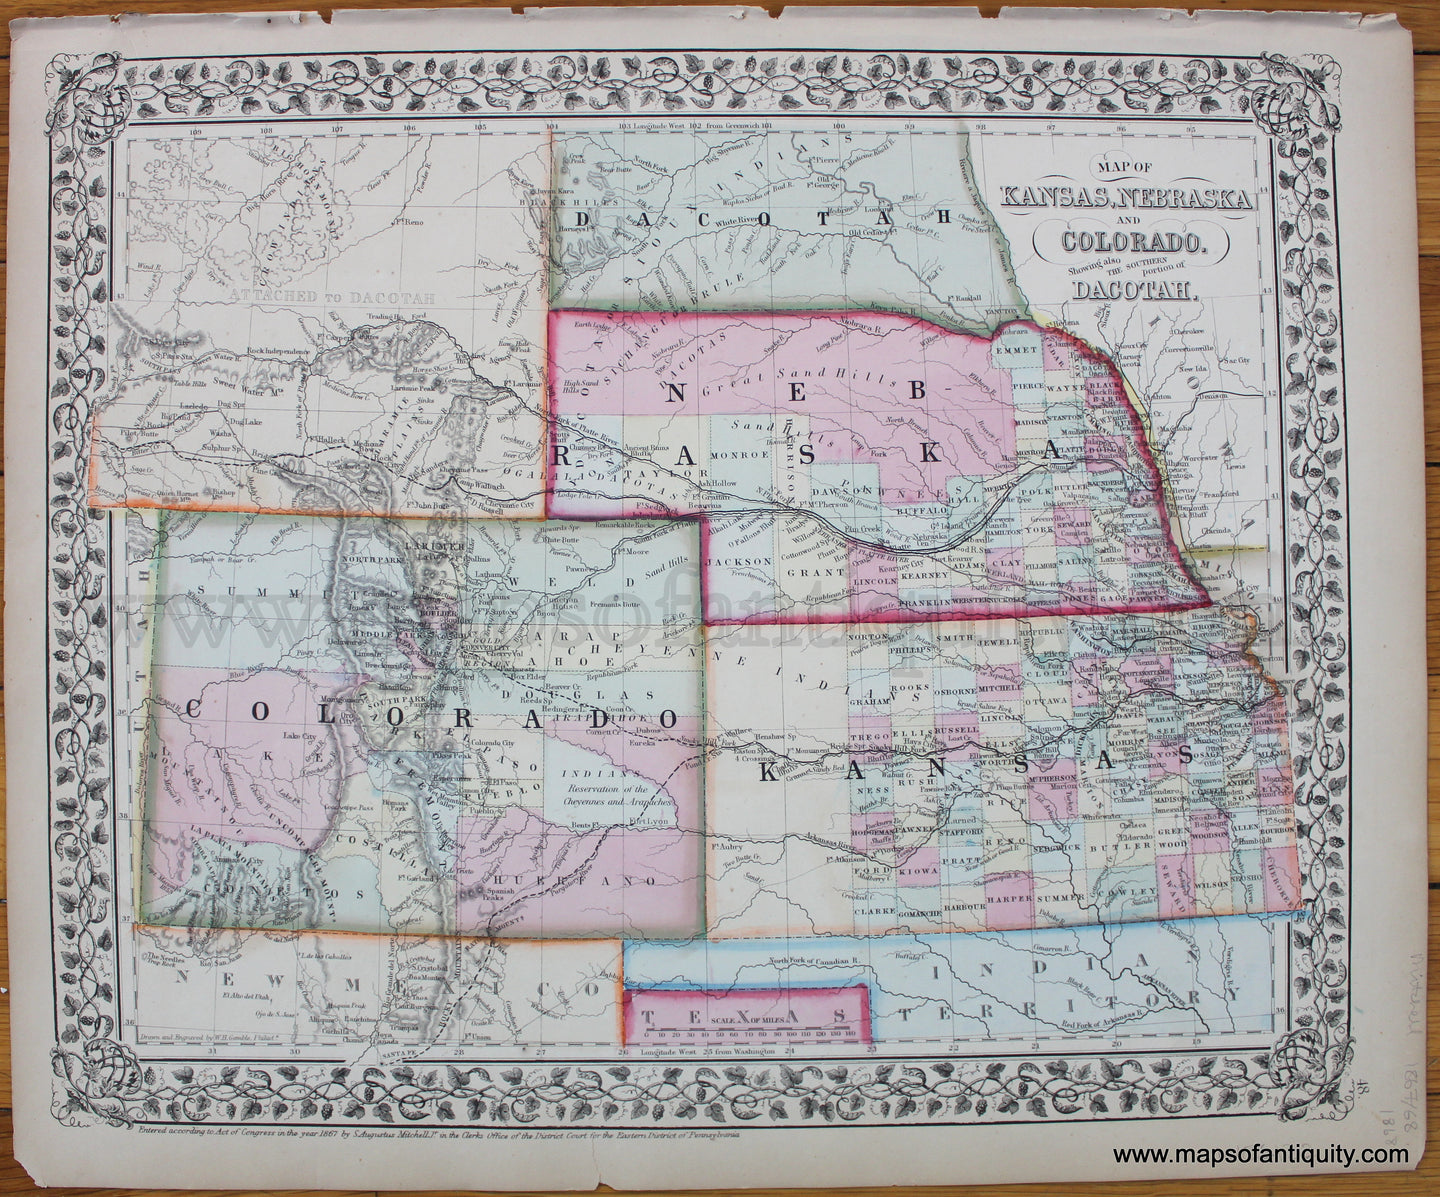 Antique-Hand-Colored-Map-Map-of-Kansas-Nebraska-and-Colorado.-Showing-also-the-Southern-portion-of-Dakotah.--United-States-West-General-1867/1868-Mitchell-Maps-Of-Antiquity